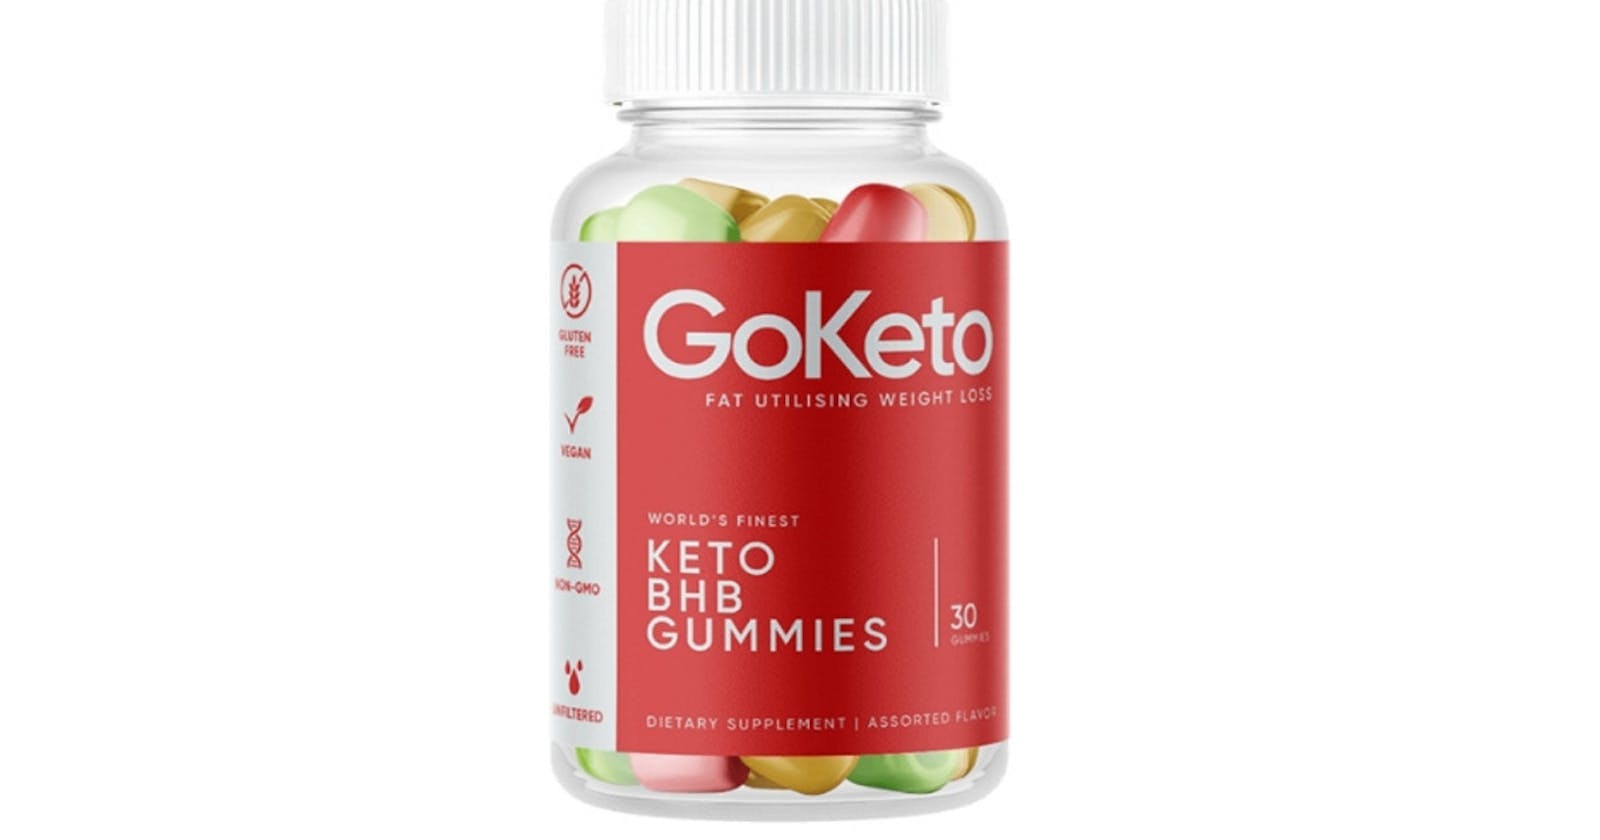 GoKeto Gummies Review - Another Scam Or Not? Find Out!